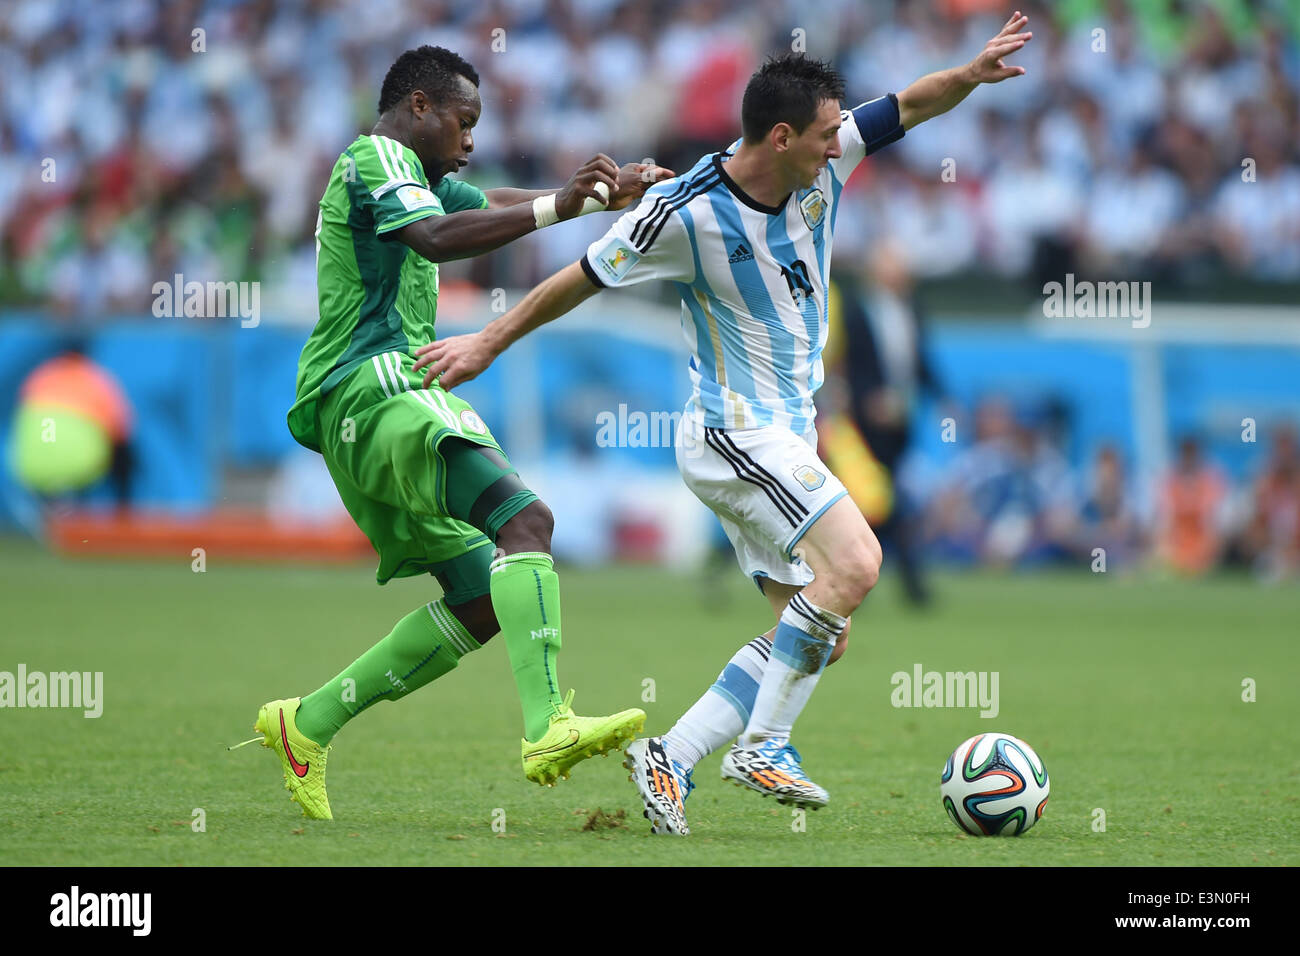 Porto Alegre, Brazil. 25th June, 2014. PORTO ALEGRE BRAZIL -15 Jun: Leo Messi and Ogenyi Onaz in the match between Argentina and Nigeria, corresponding to the group F of the World Cup 2014, played at the Beira Rio stadium, on June 25, 2014. Photo: Edu Andrade/Urbanandsport/Nurphoto Credit:  Edu Andrade/NurPhoto/ZUMAPRESS.com/Alamy Live News Stock Photo